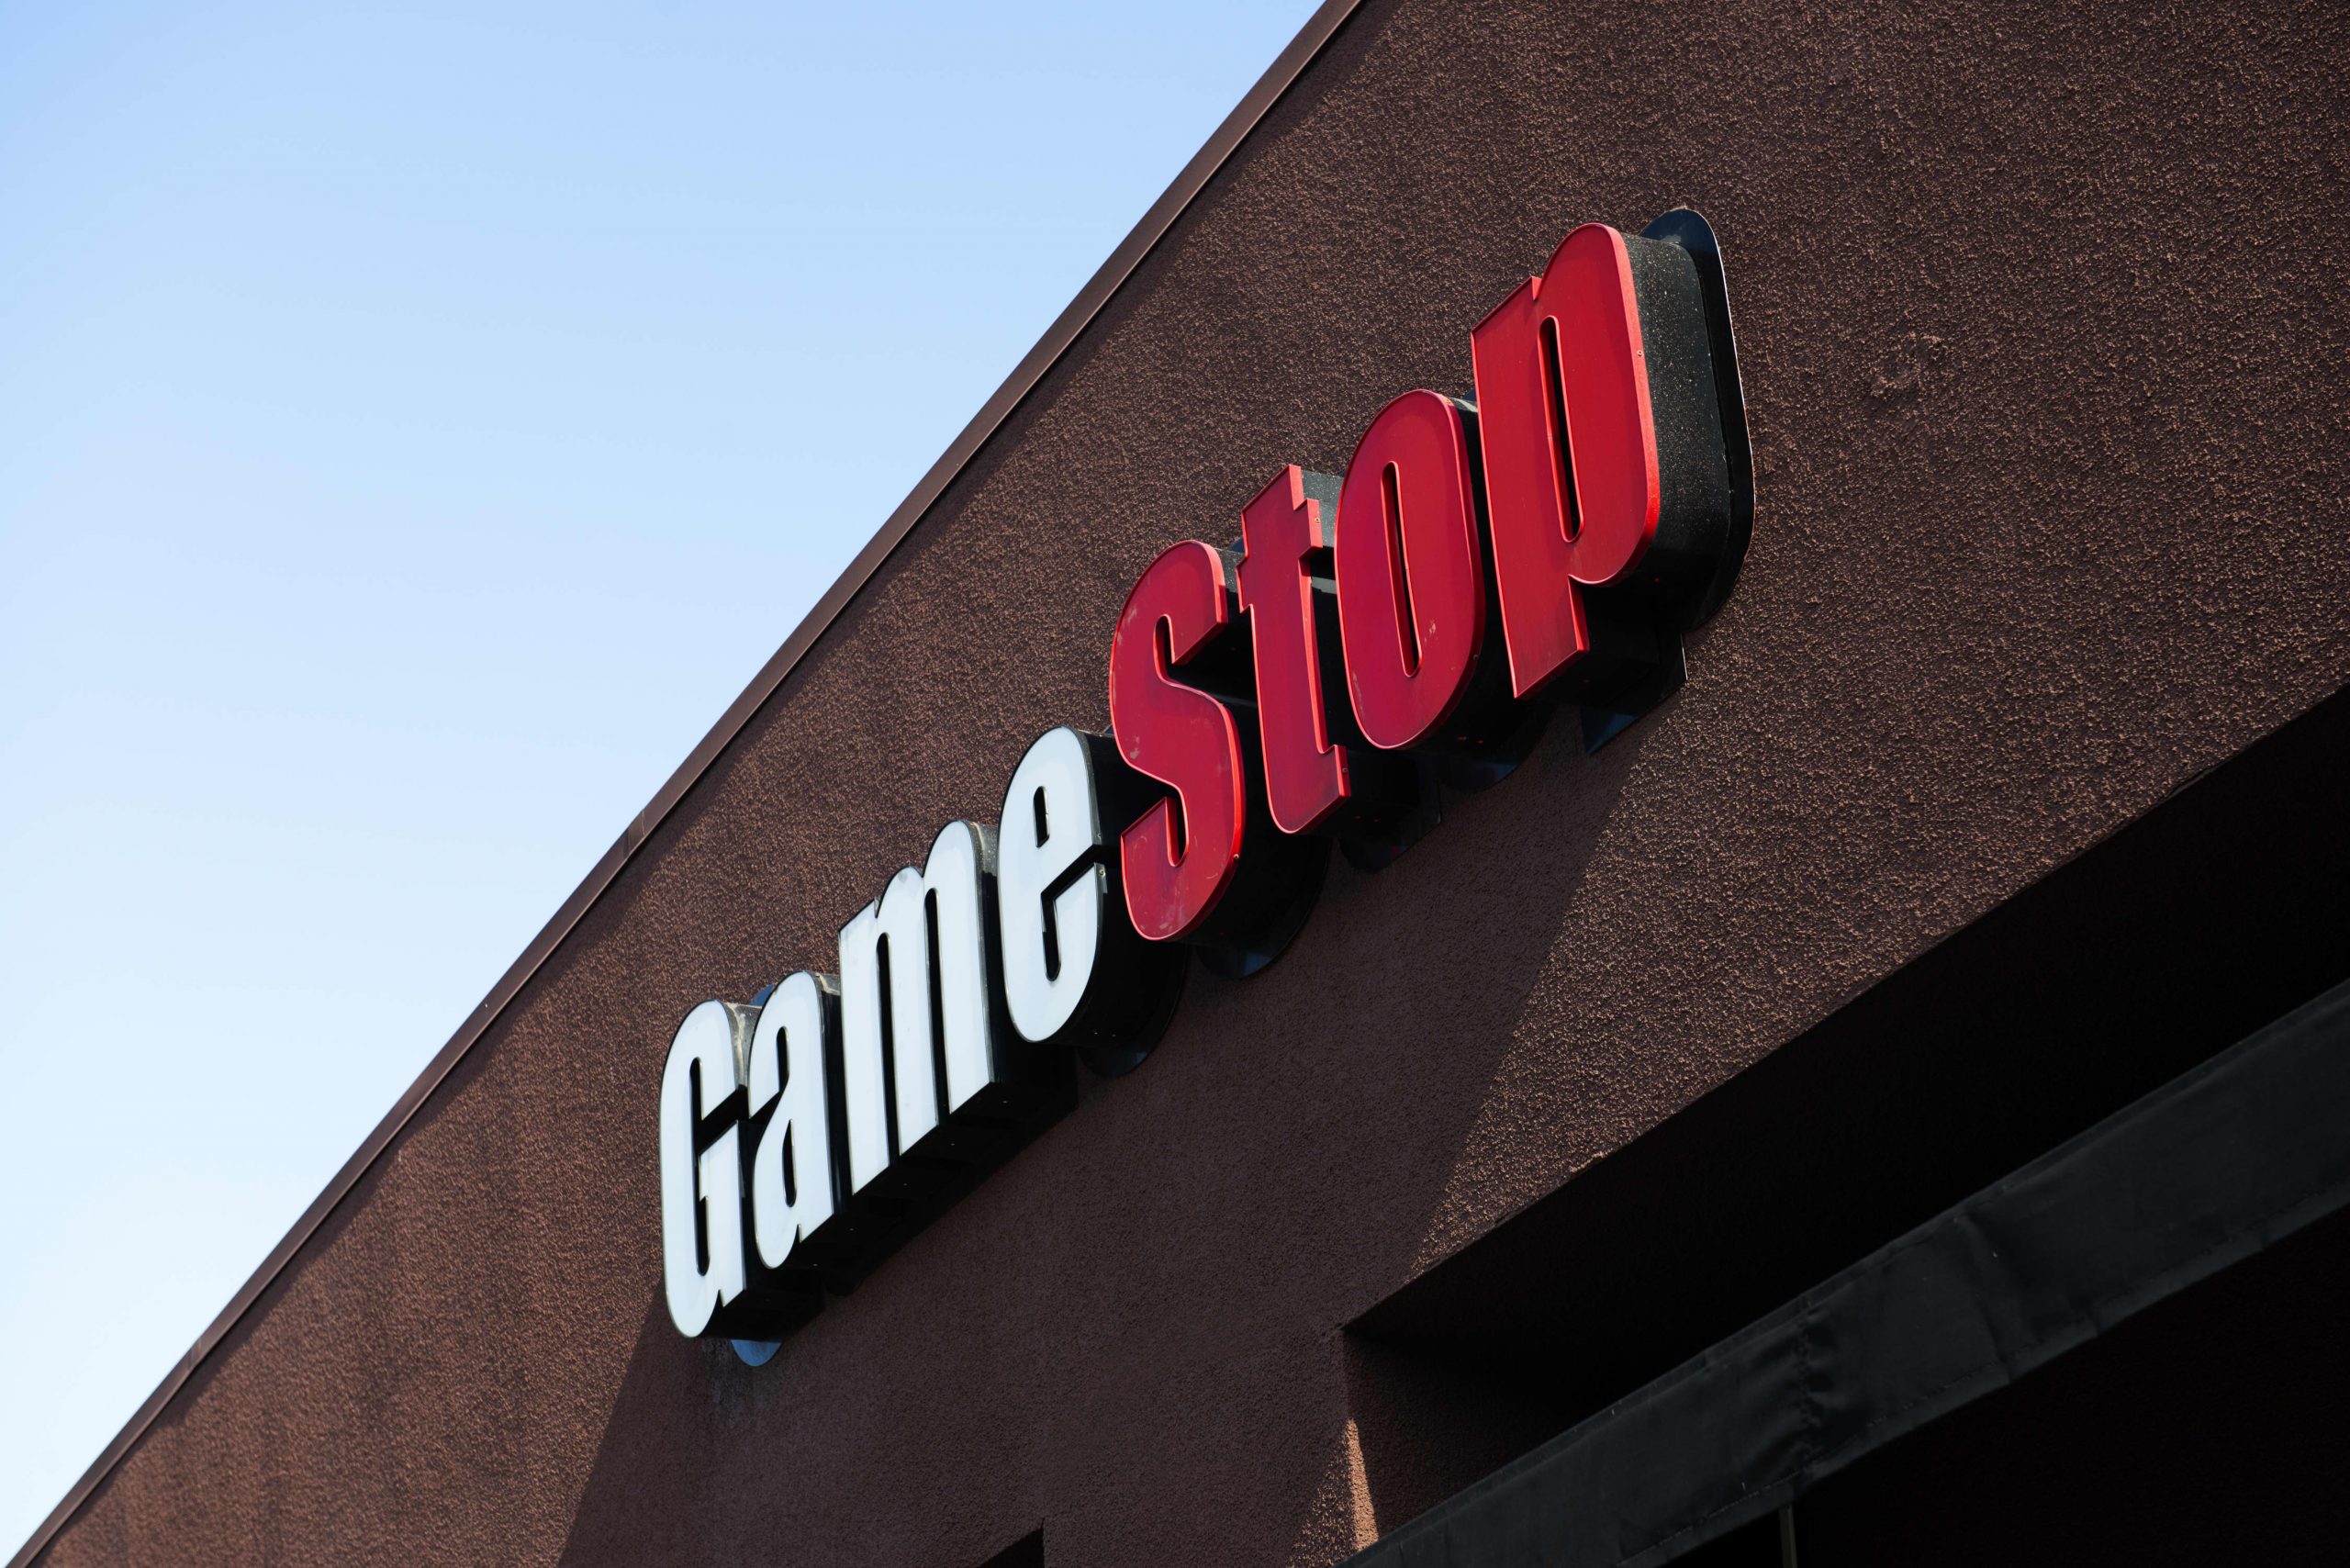 GameStop frenzy results in unrealistic expectations for returns